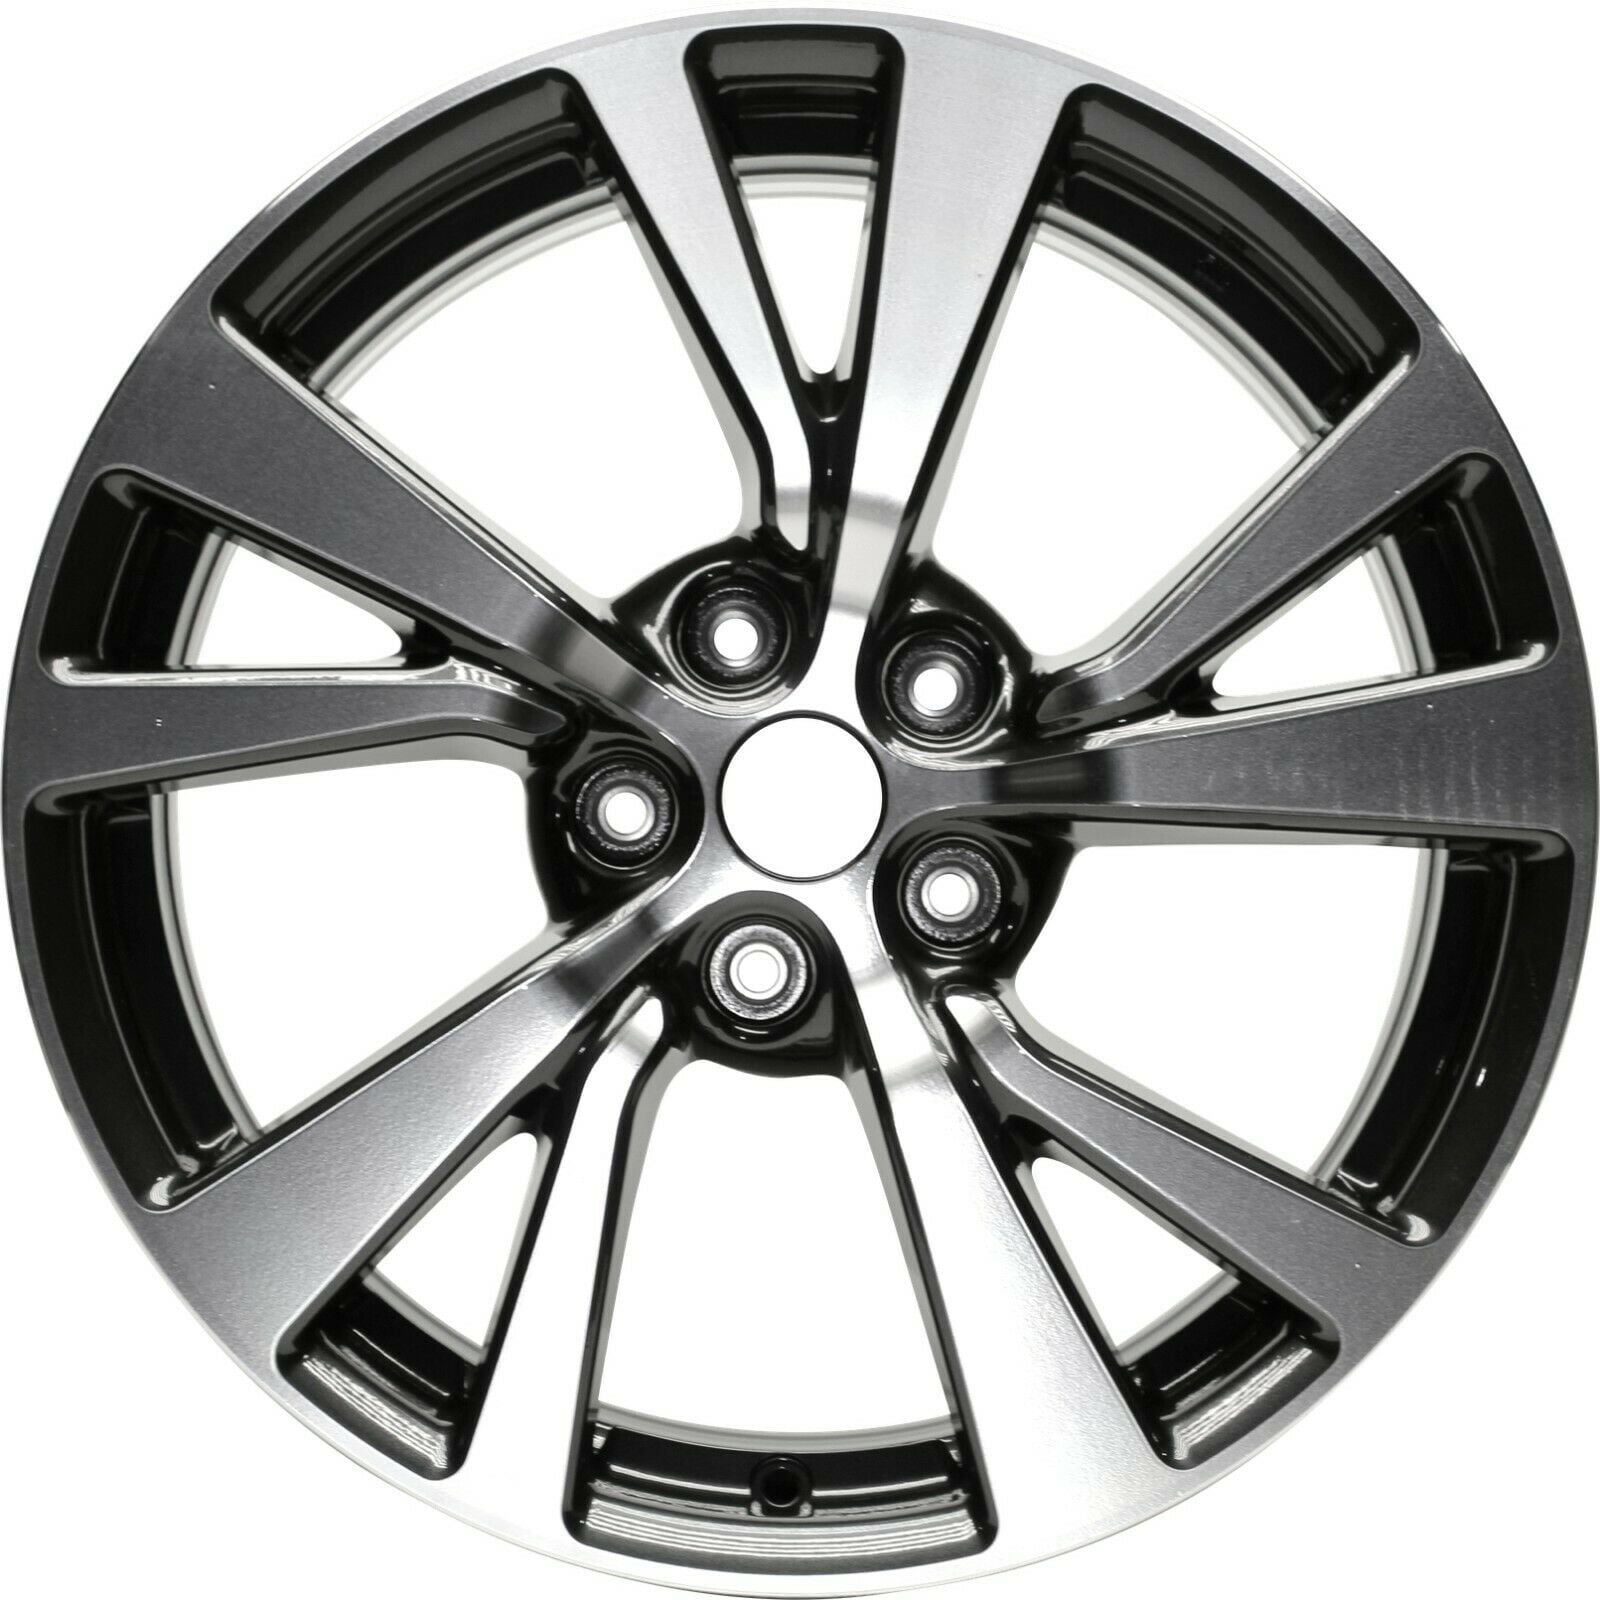 PartSynergy Replacemenet For New Replica 16 Inch Steel Wheel Rim Fits 2002-2006 Nissan Altima OEM 5-114.3mm 15 Hole 